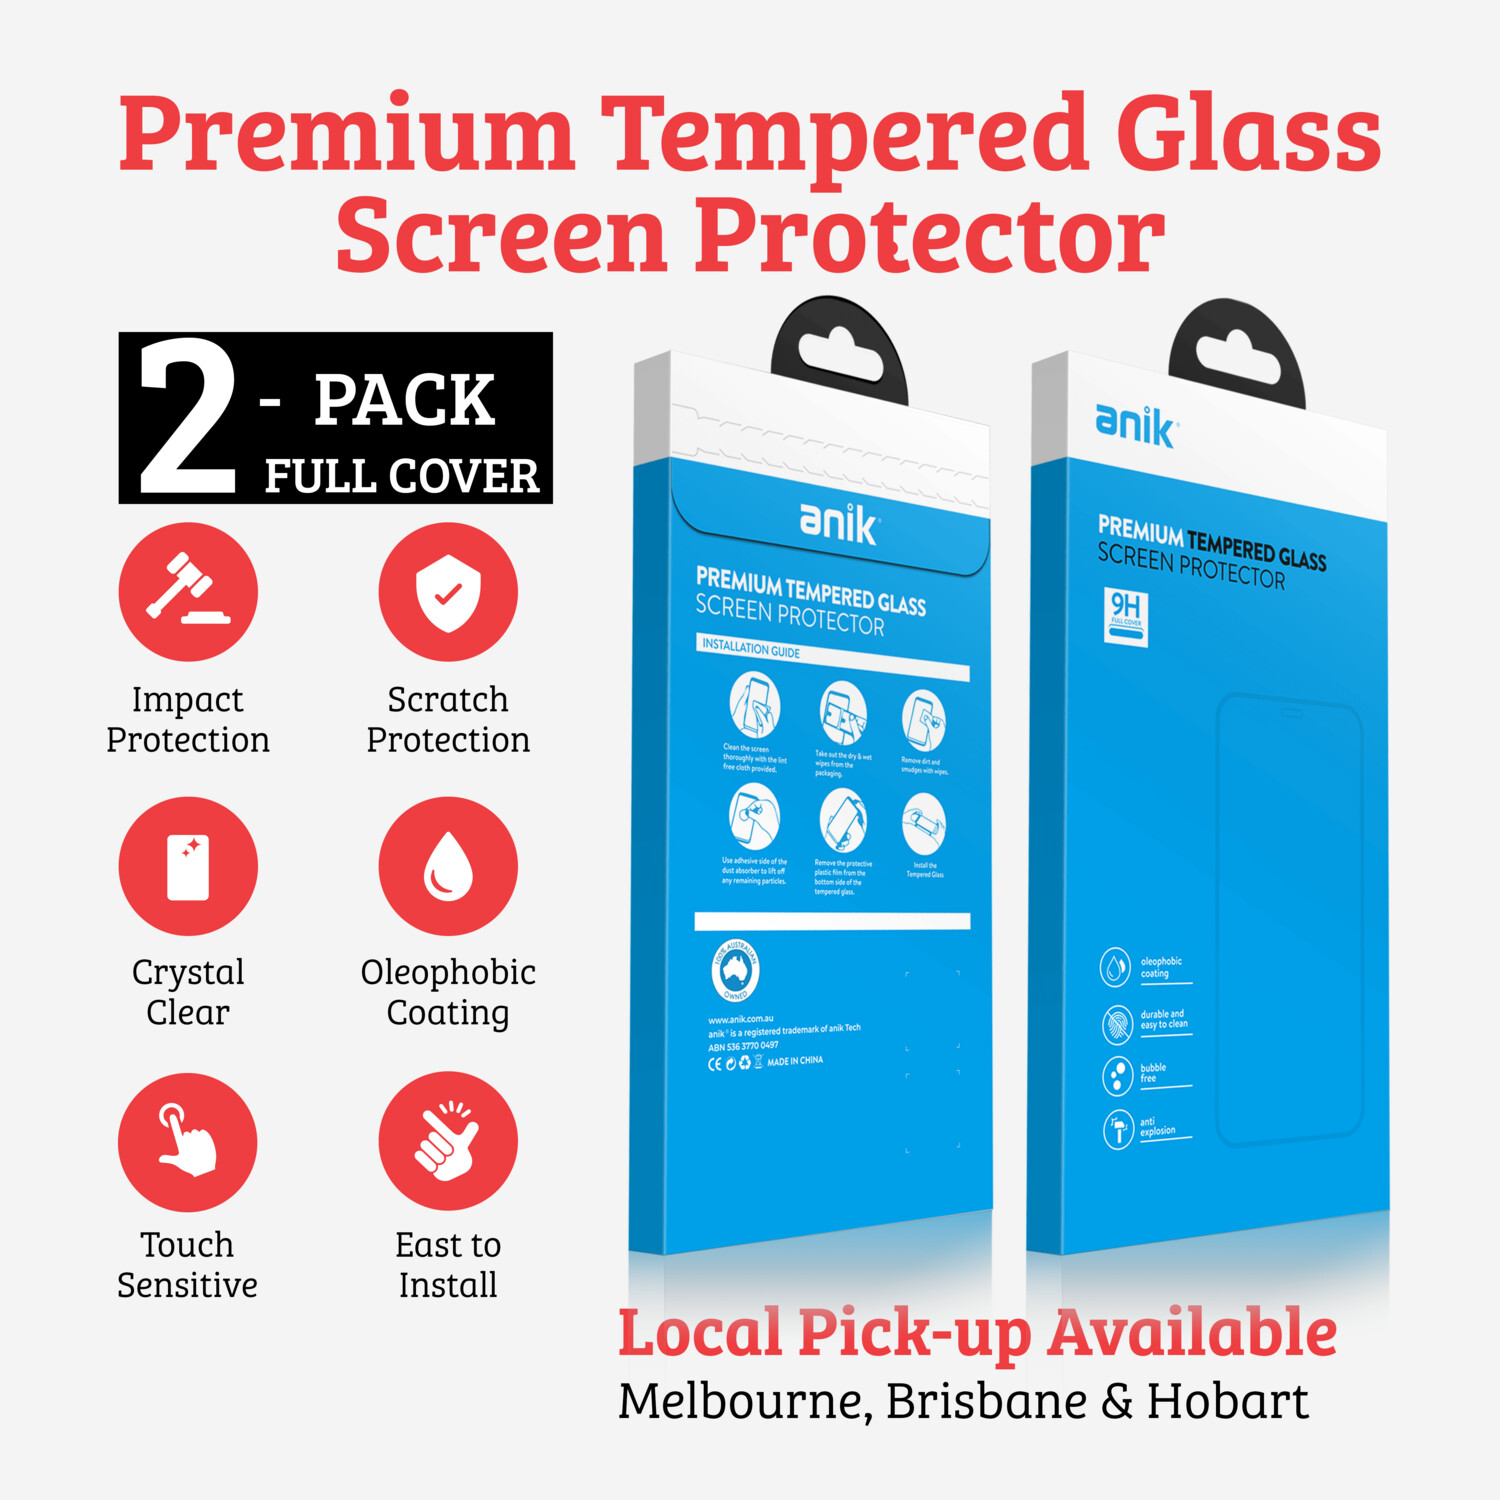 ANIK Premium Full Cover Tempered Glass Screen Protector for iPhone 12 Pro [2 Pack]